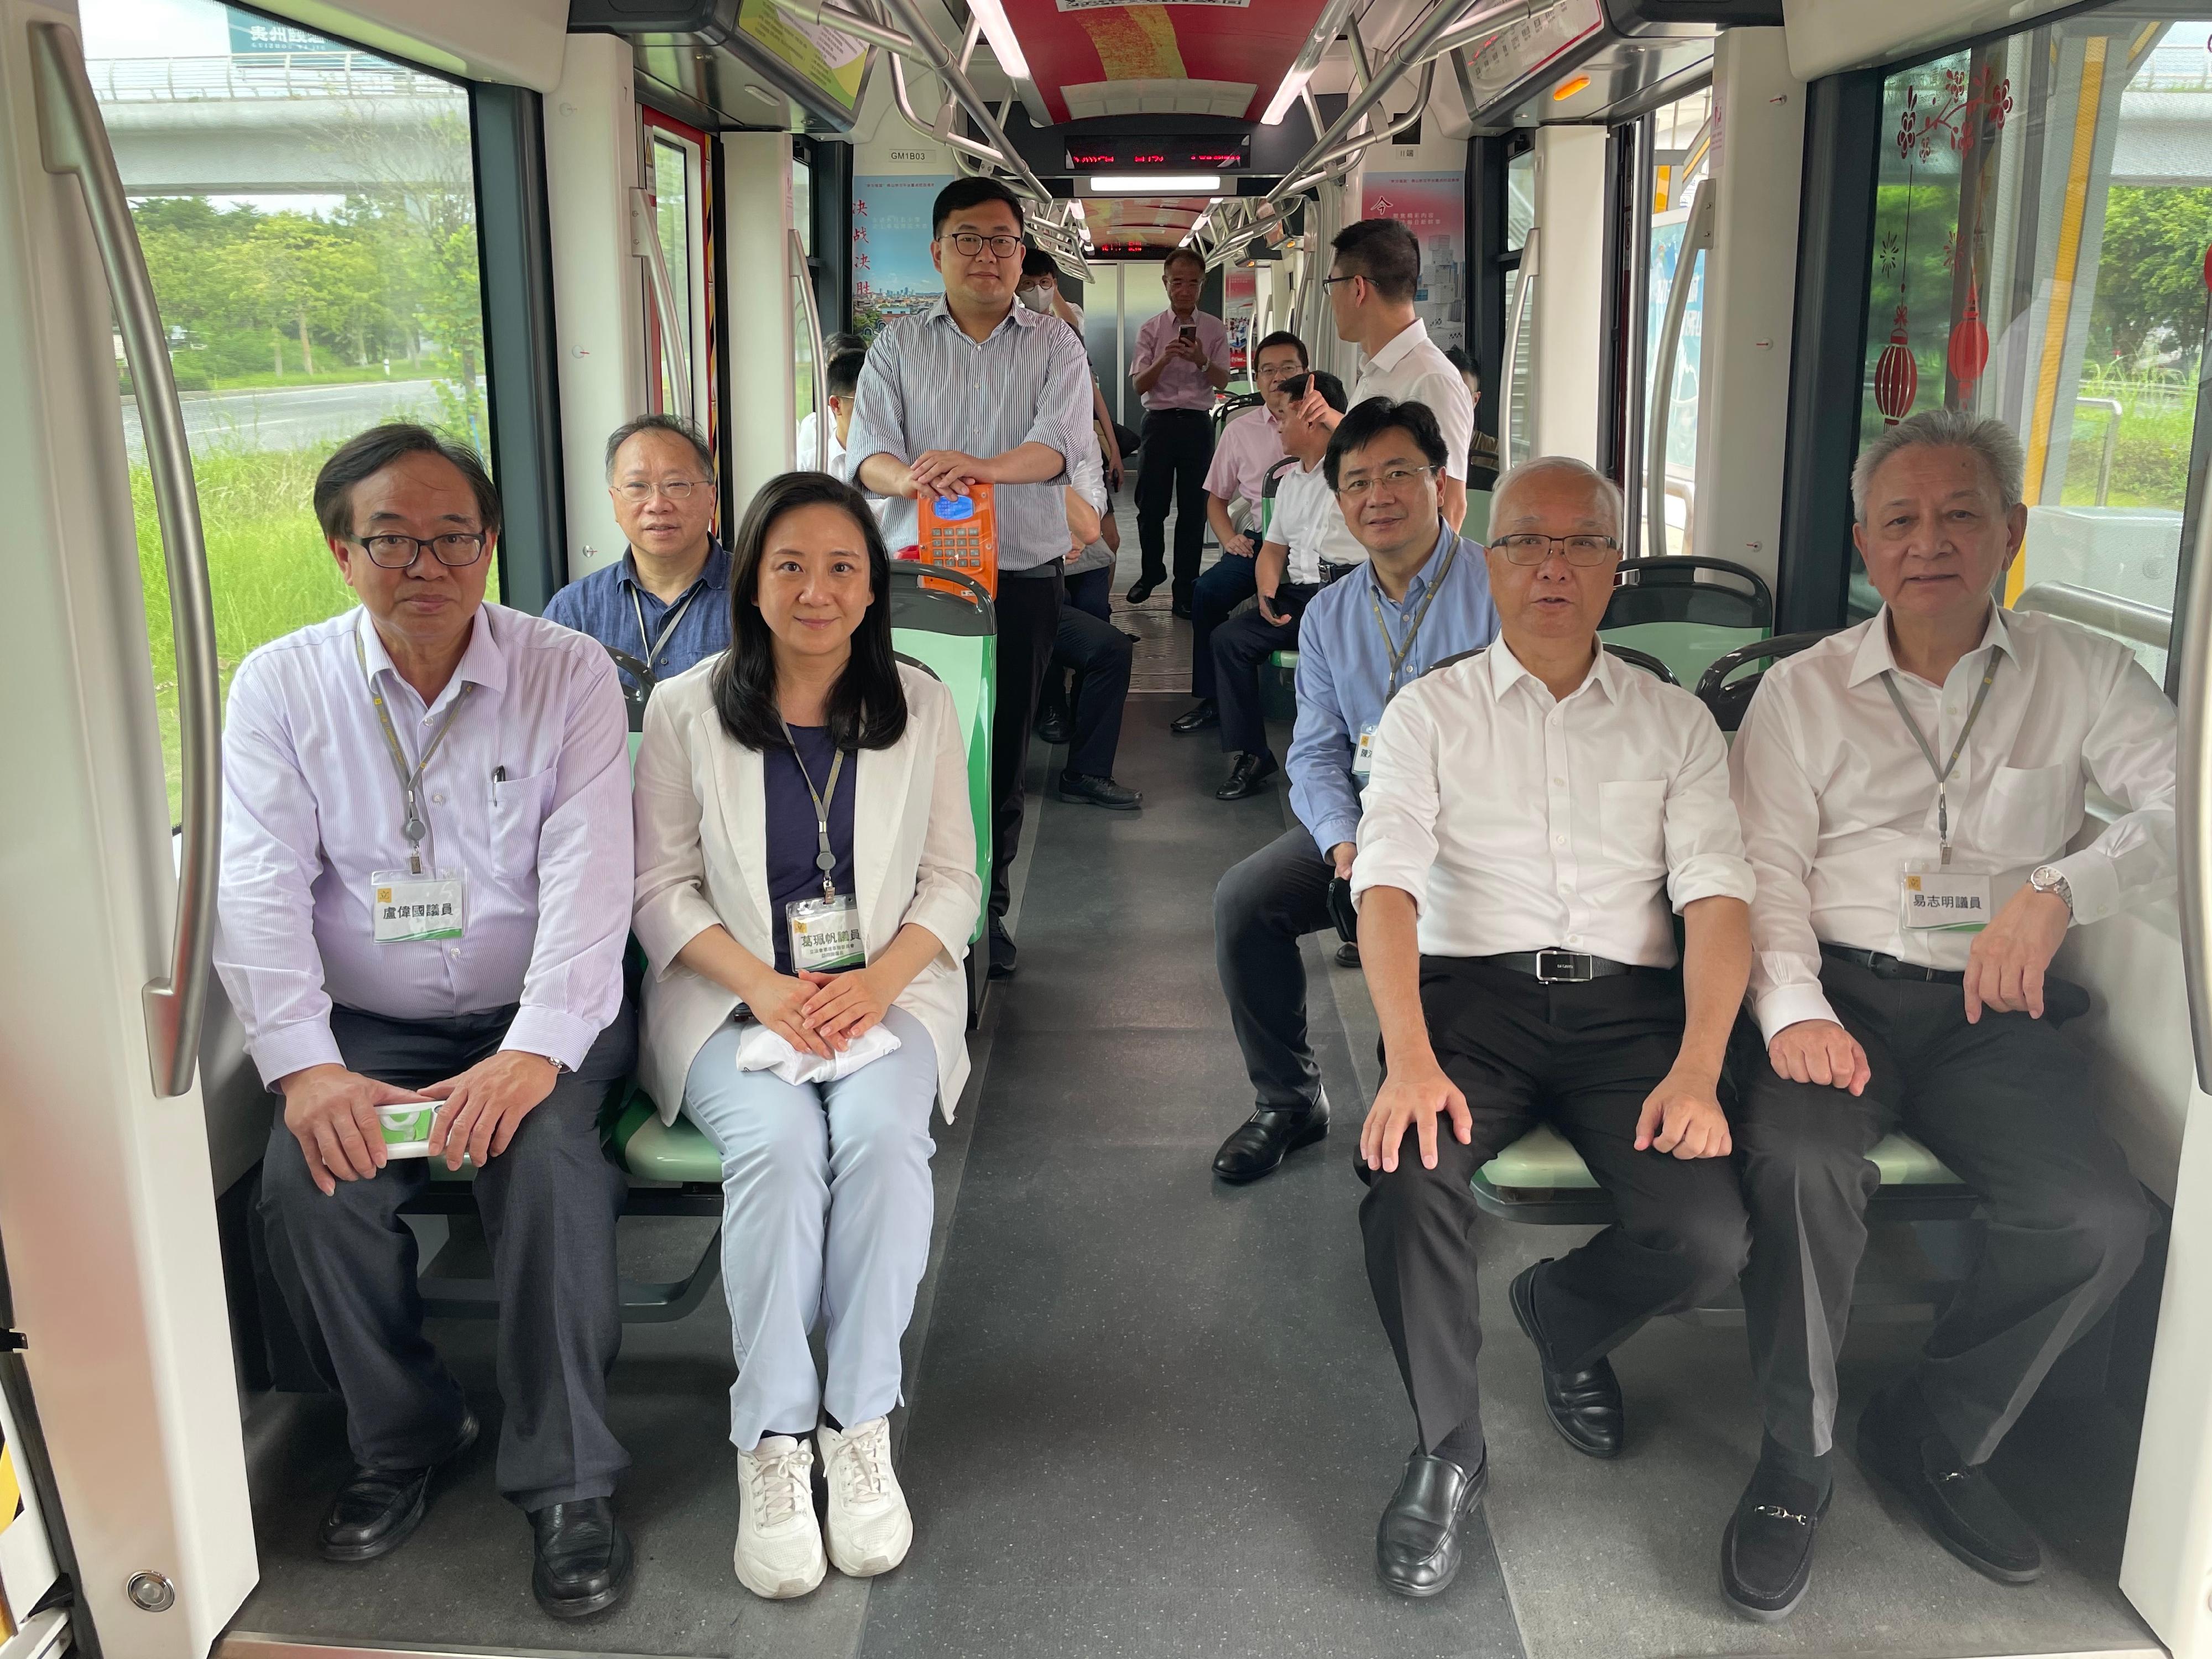 The Secretary for Environment and Ecology, Mr Tse Chin-wan, together with the Legislative Council Panel on Environmental Affairs, today (August 8) visited Foshan, which is the pioneer demonstration area for the development of the hydrogen energy industry in Guangdong Province, in the morning. Photo shows Mr Tse (second right) and the delegation of the Legislative Council Panel on Environmental Affairs, riding on a hydrogen-fuelled light rail vehicle.